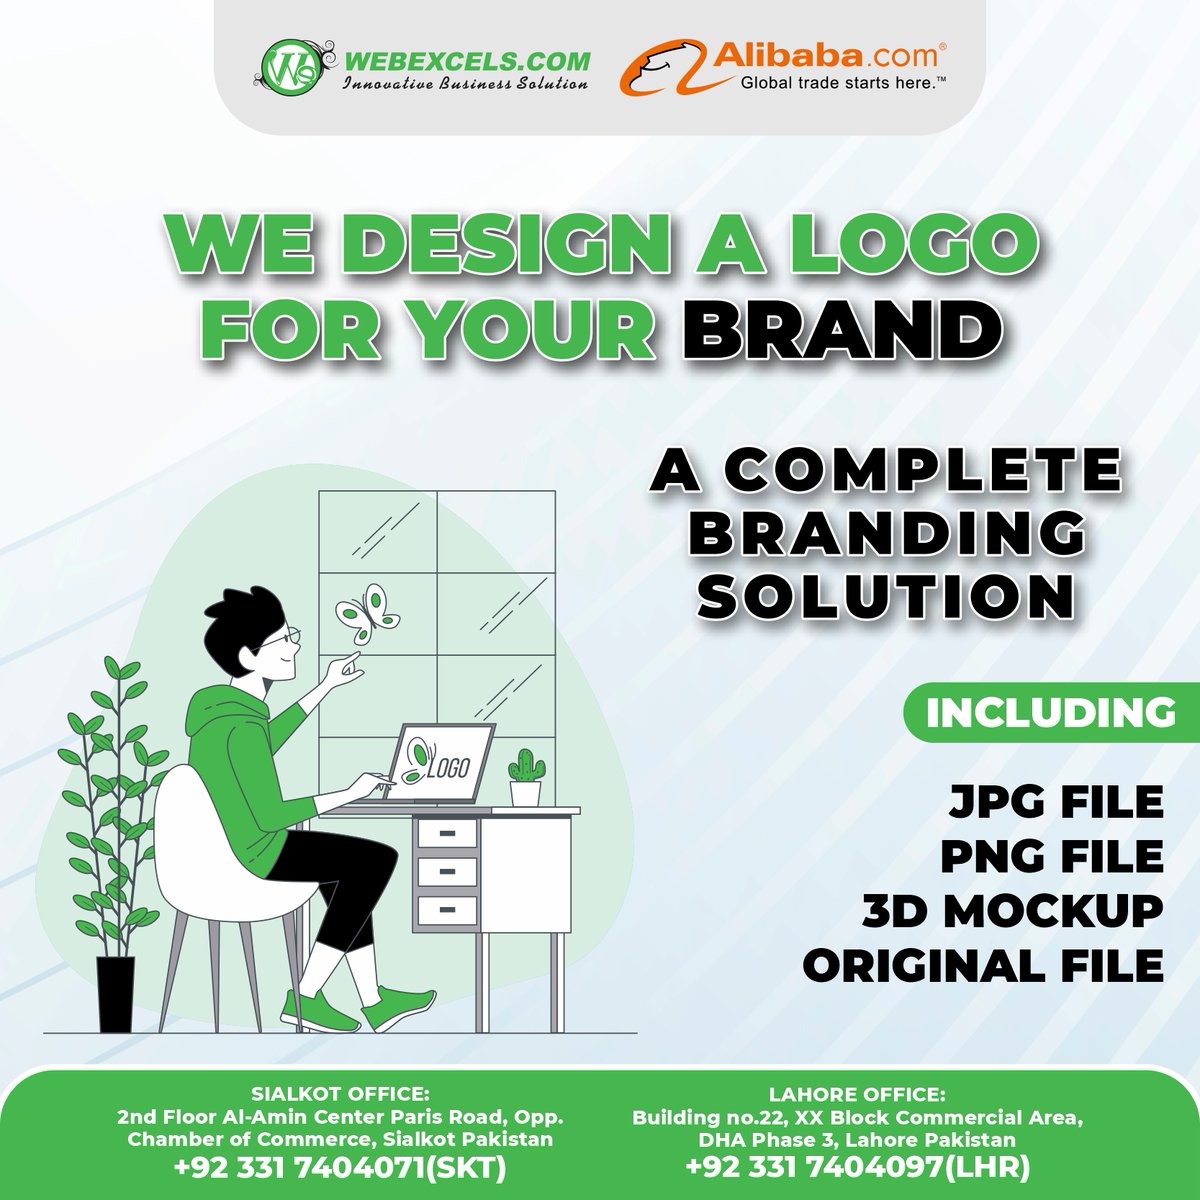 'Transform Your Brand with Stunning Logo Designs by Web Excels'

#LogoDesignServices #WebExcelsDesigns #CreativeLogos #BrandIdentity #LogoDesignExperts #CustomLogoDesign #ProfessionalDesignServices #LogoCreation #GraphicDesign #BrandTransformation #WebExcels